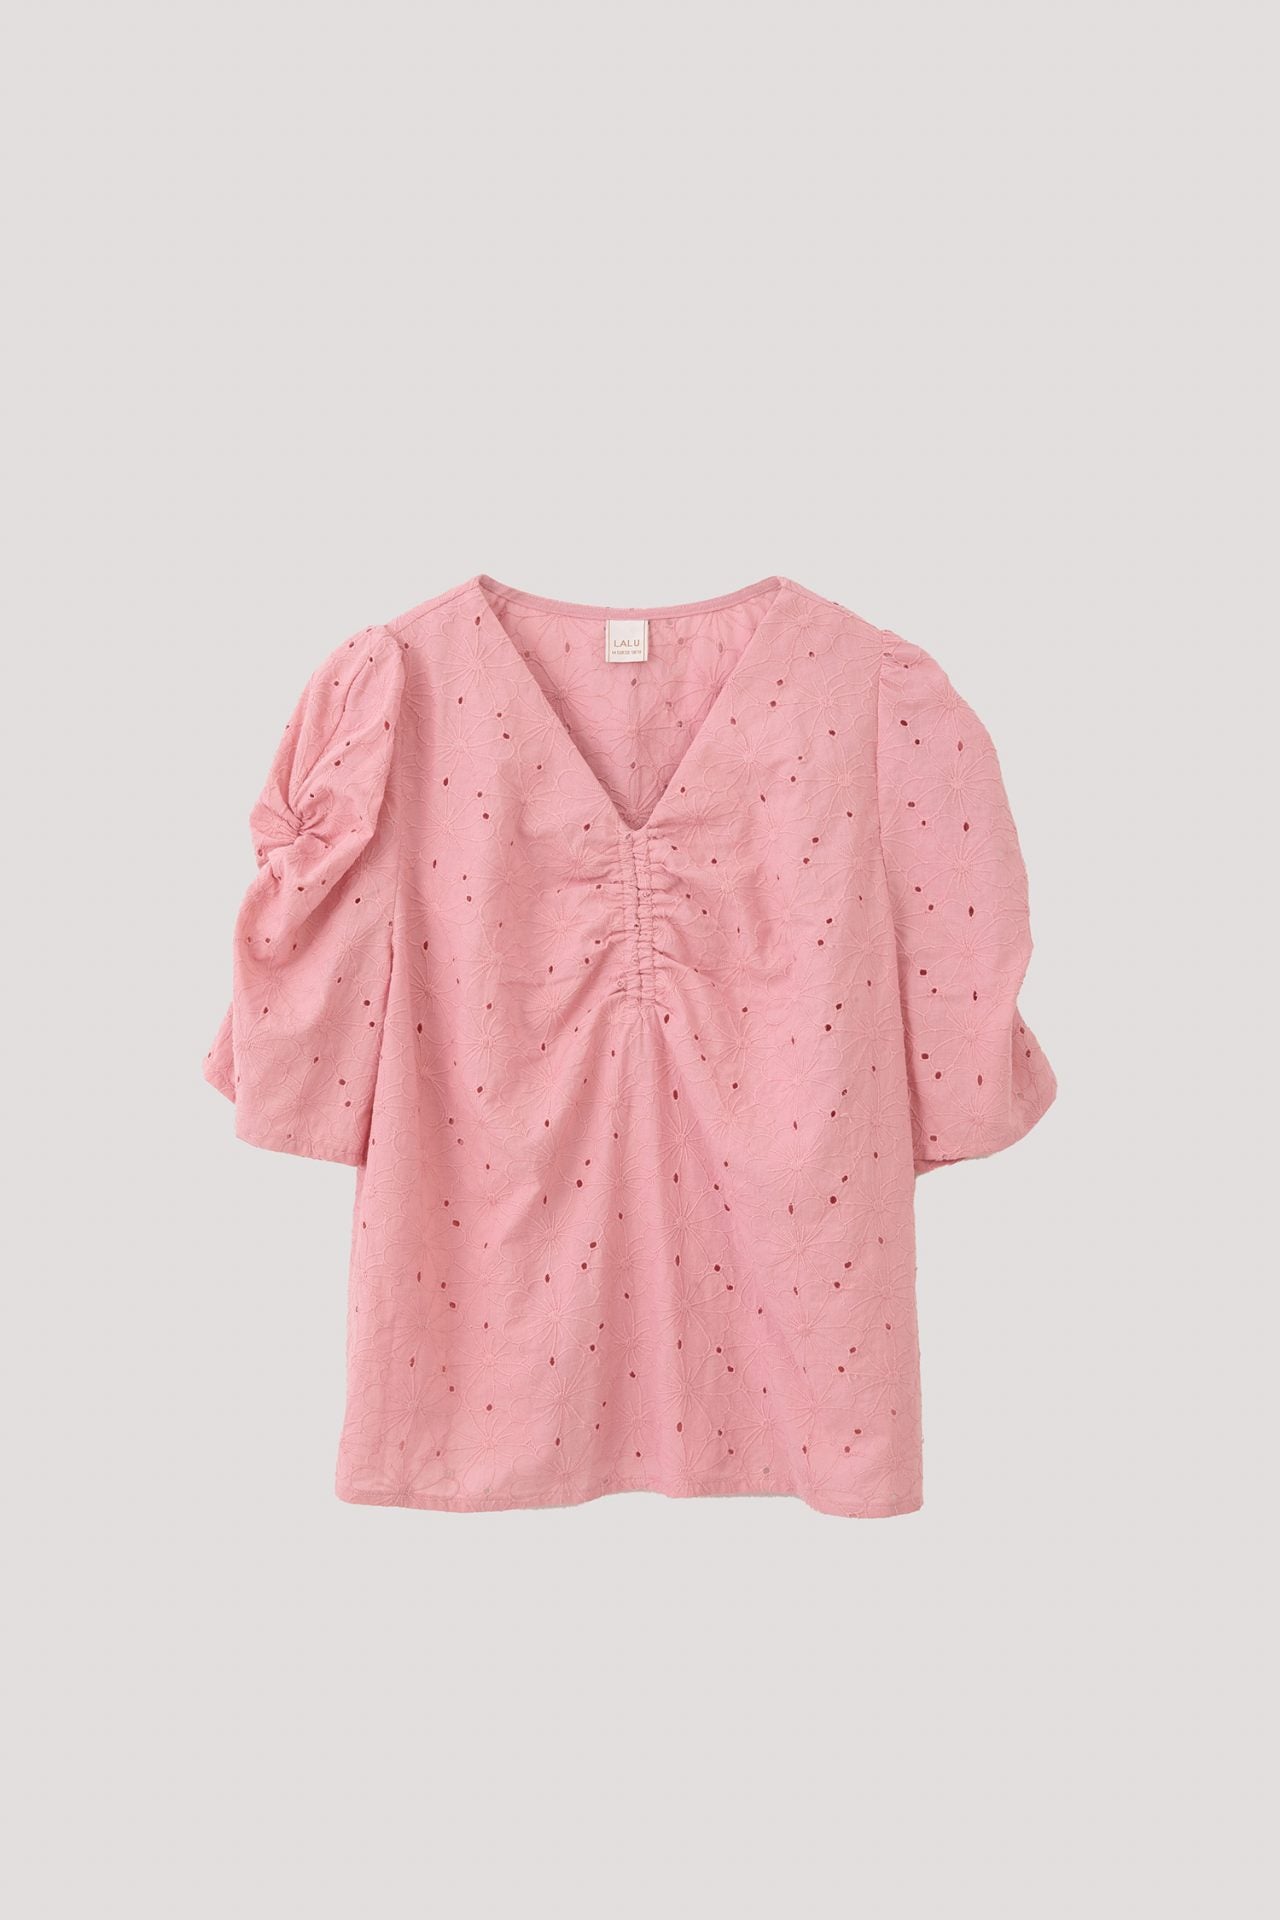 BB 11201 V-NECK PUFFED SLEEVES BLOUSE PINK